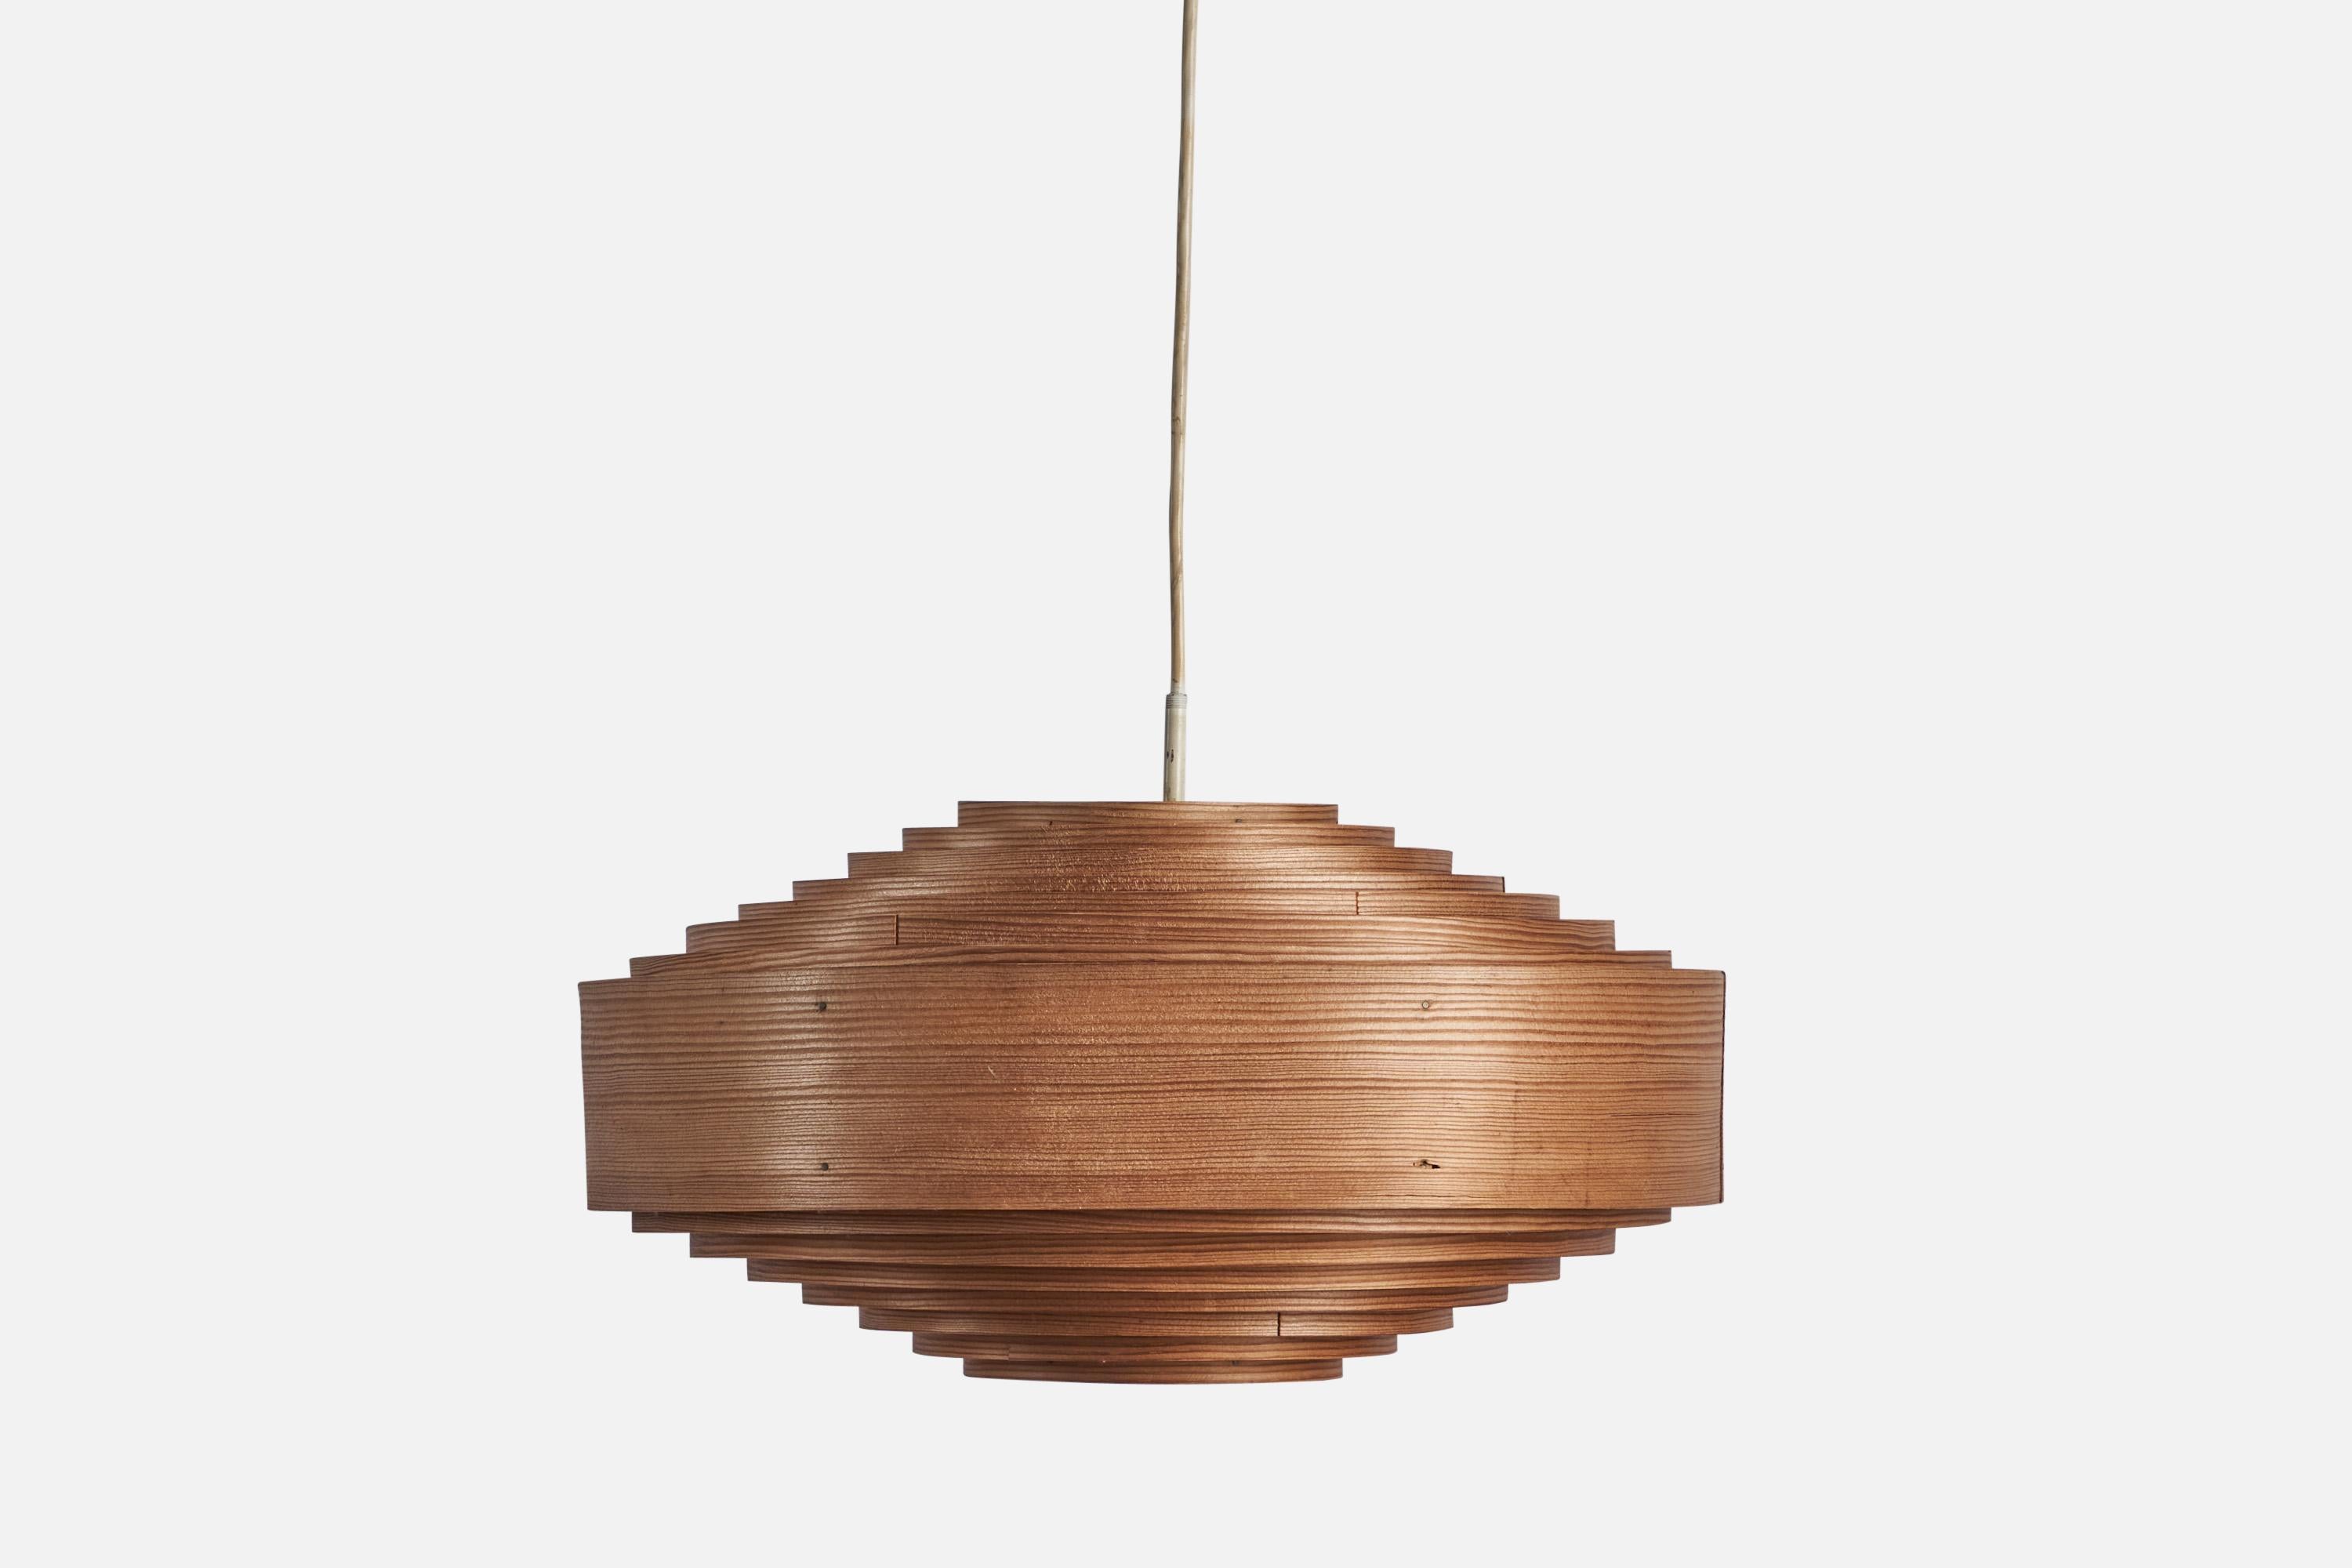 A moulded pine veneer pendant designed by Hans-Agne Jakobsson and produced by Elysett AB, Sweden, 1970s.

Overall Dimensions (inches): 10” H x 20” Diameter
Drop variable
Bulb Specifications: E-26 Bulb
Number of Sockets: 3
All lighting will be